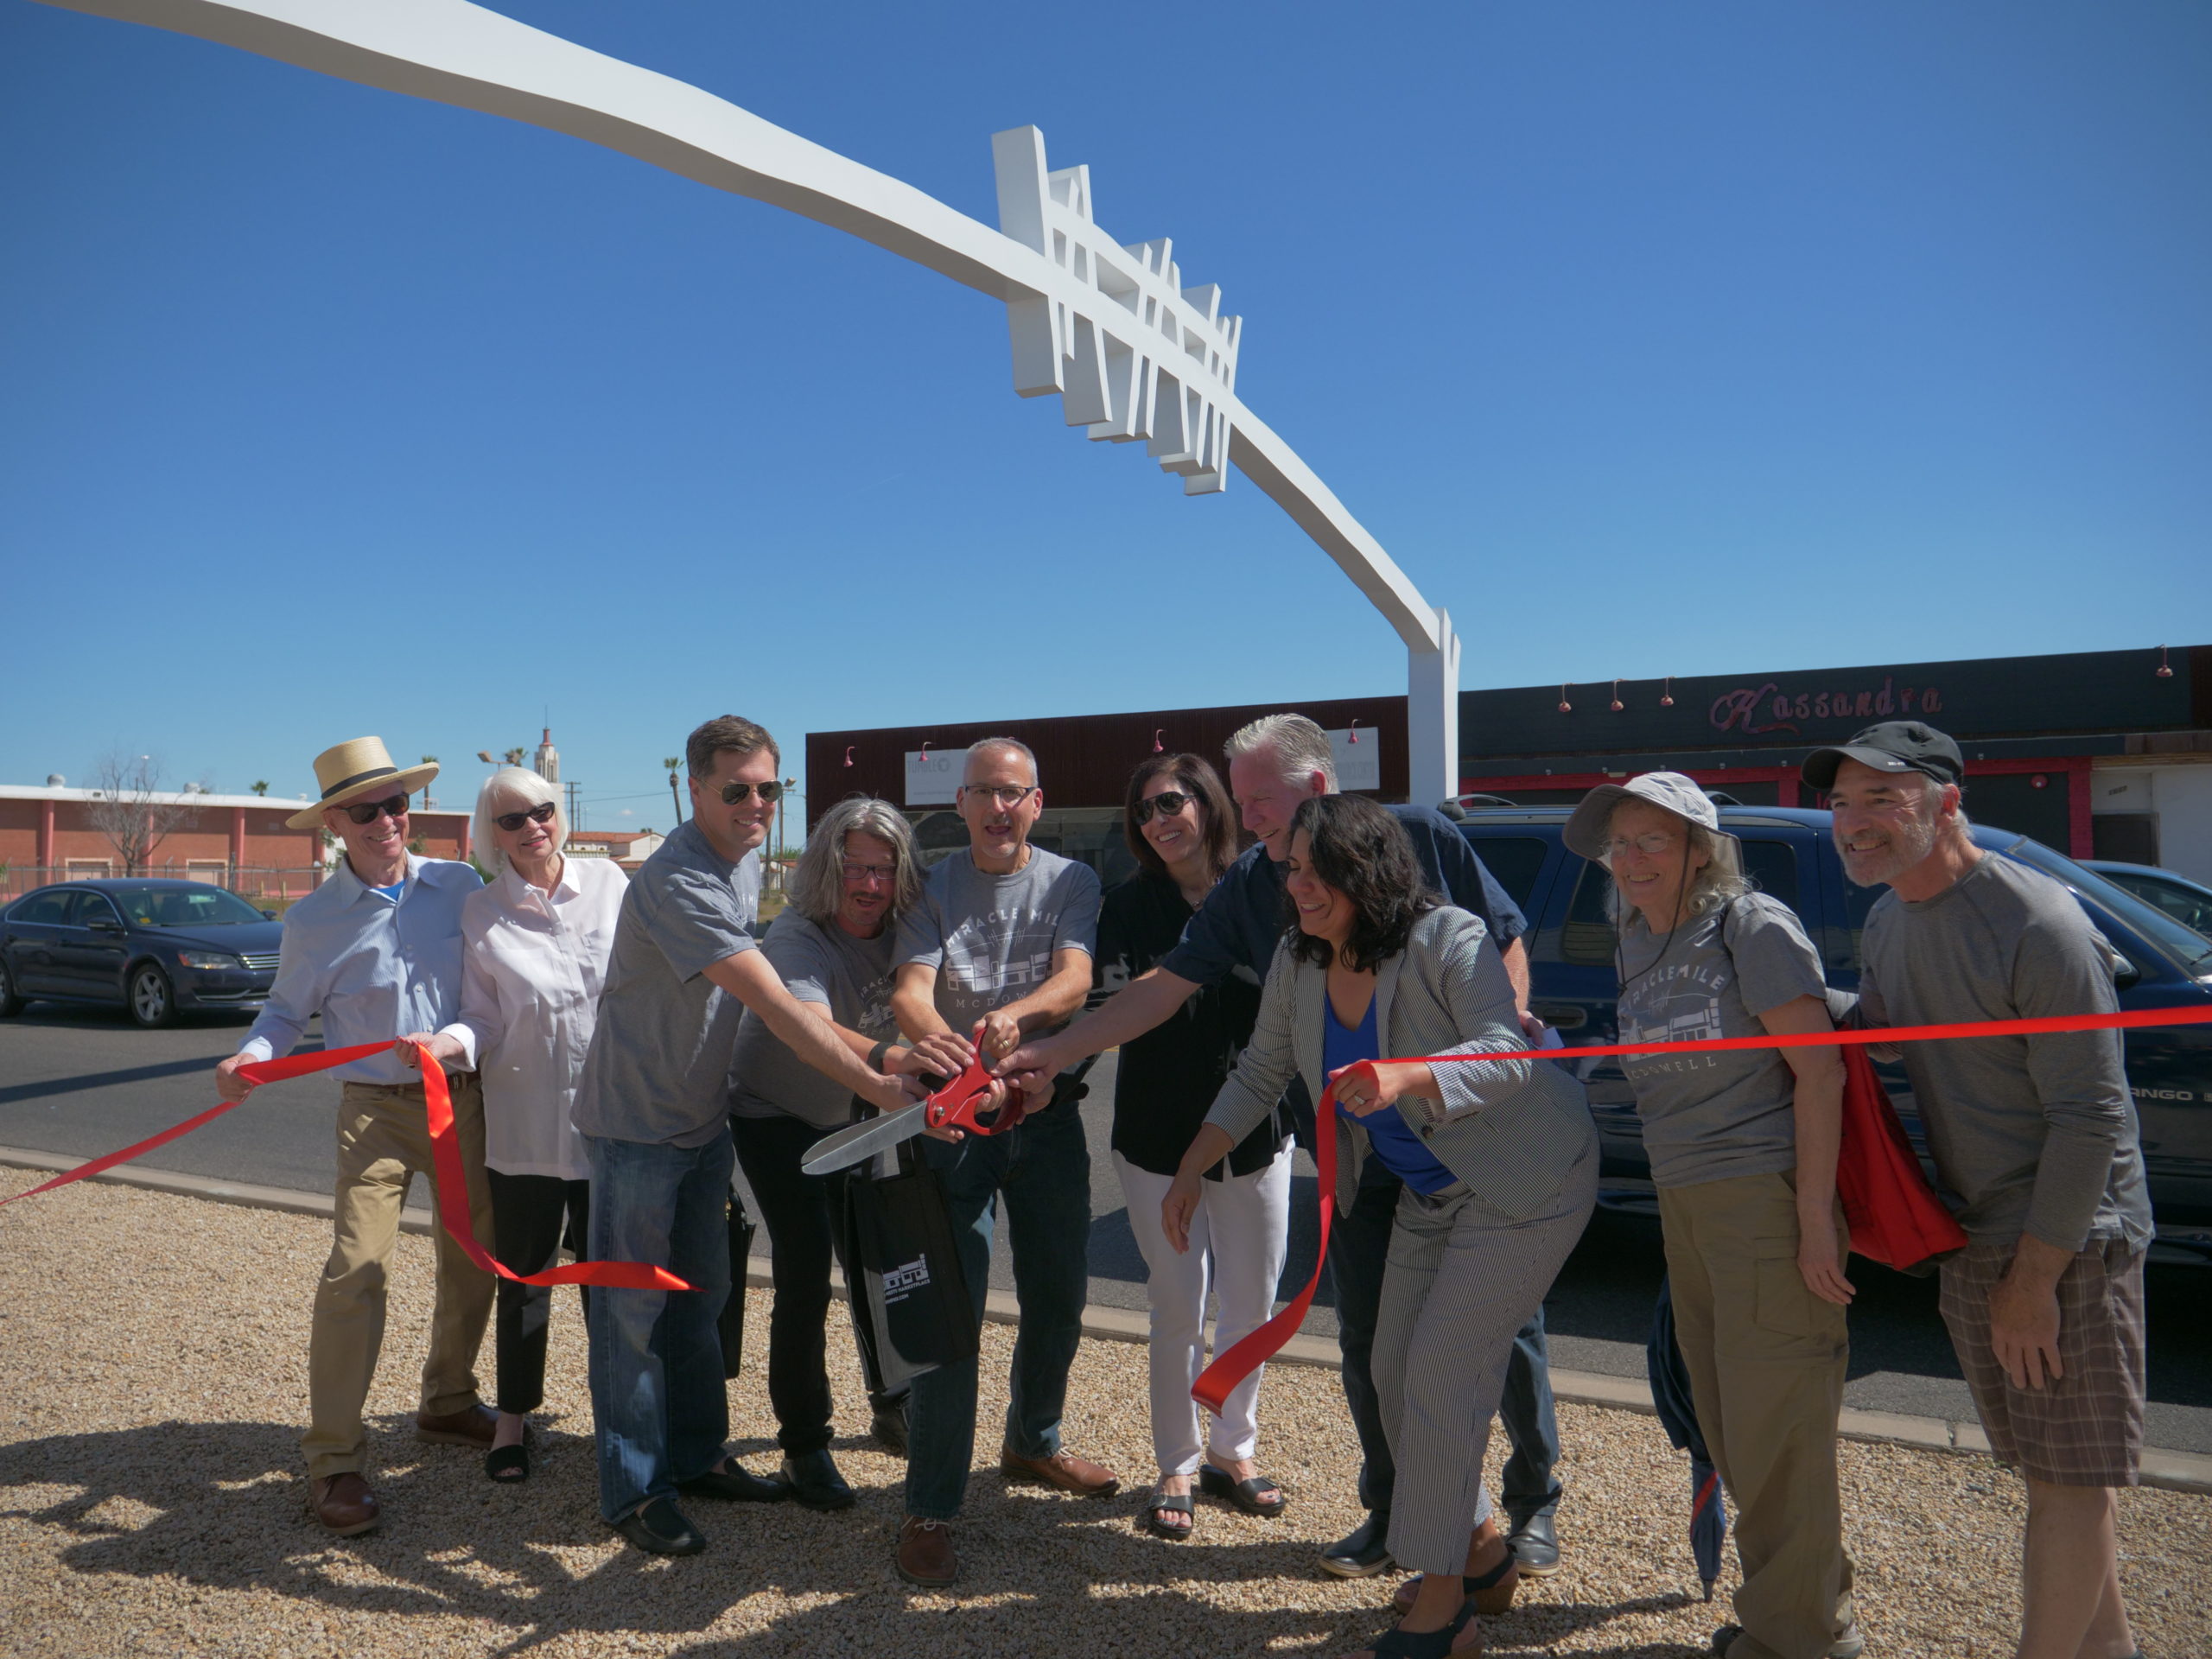 The McDowell Gateway Arch is rededicated.  From left to right: Joan Armstrong & Joan Armstrong, Armstrong Prior Gallery; Josh Tinkle, Administrator Banner University Medical Center Phoenix,; Michael Kelly, Miracle Mile Commercial Corridor Coordinator Trellis; Joel McCabe, COO Trellis, Michelle Stuhl, McDowell Gateway Artist; Michael Anderson, McDowell Gateway Artist, Councilwoman Laura Pastor, District 4 Phoenix; Dr. Donna Reiner, Friends of Phoenix Public Art; Mike Oleskow, Curator Found:RE.